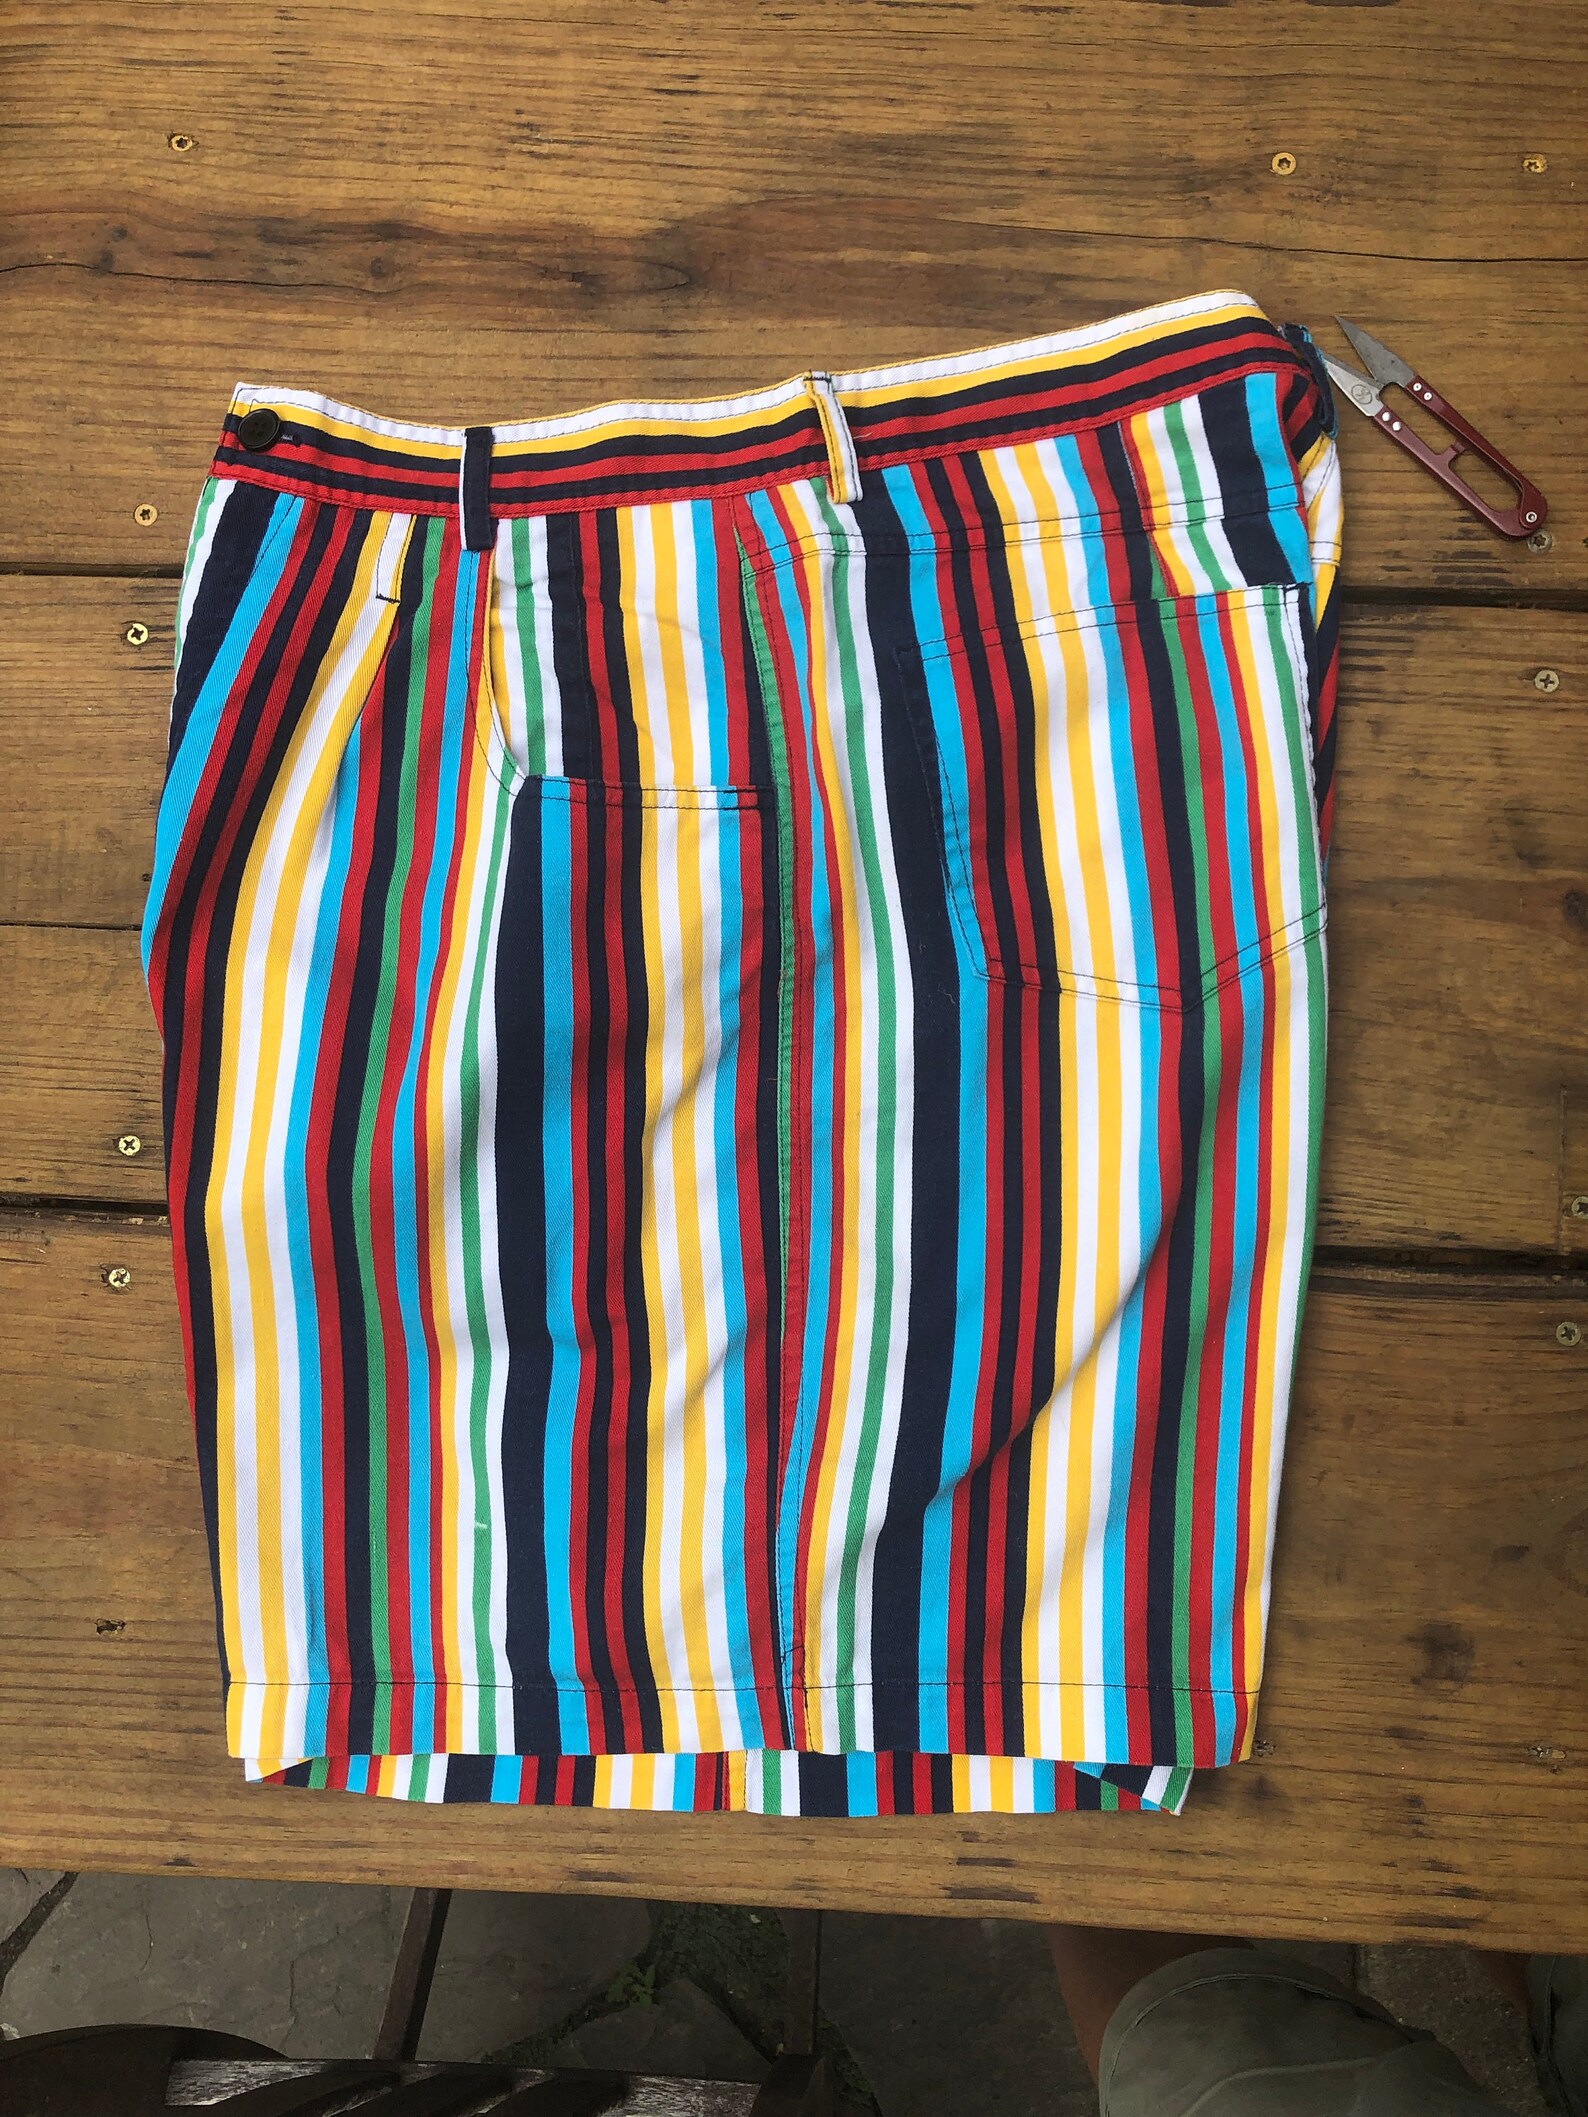 90s striped color block shorts high waisted oversized fit | Etsy